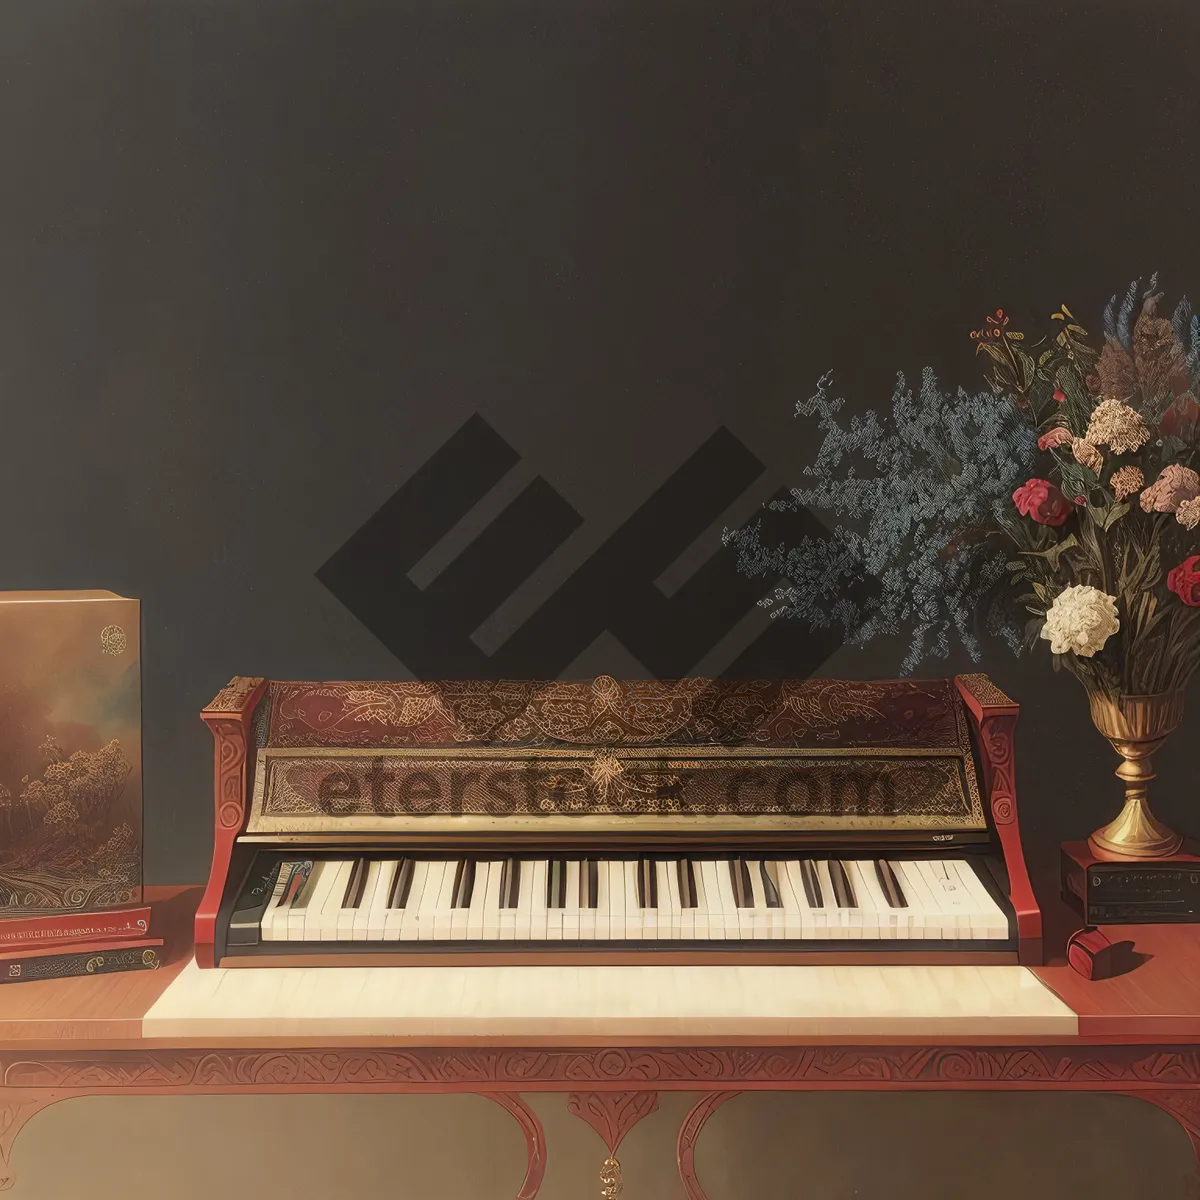 Picture of Melodic Keys: Musical Instrument Keyboard Playing